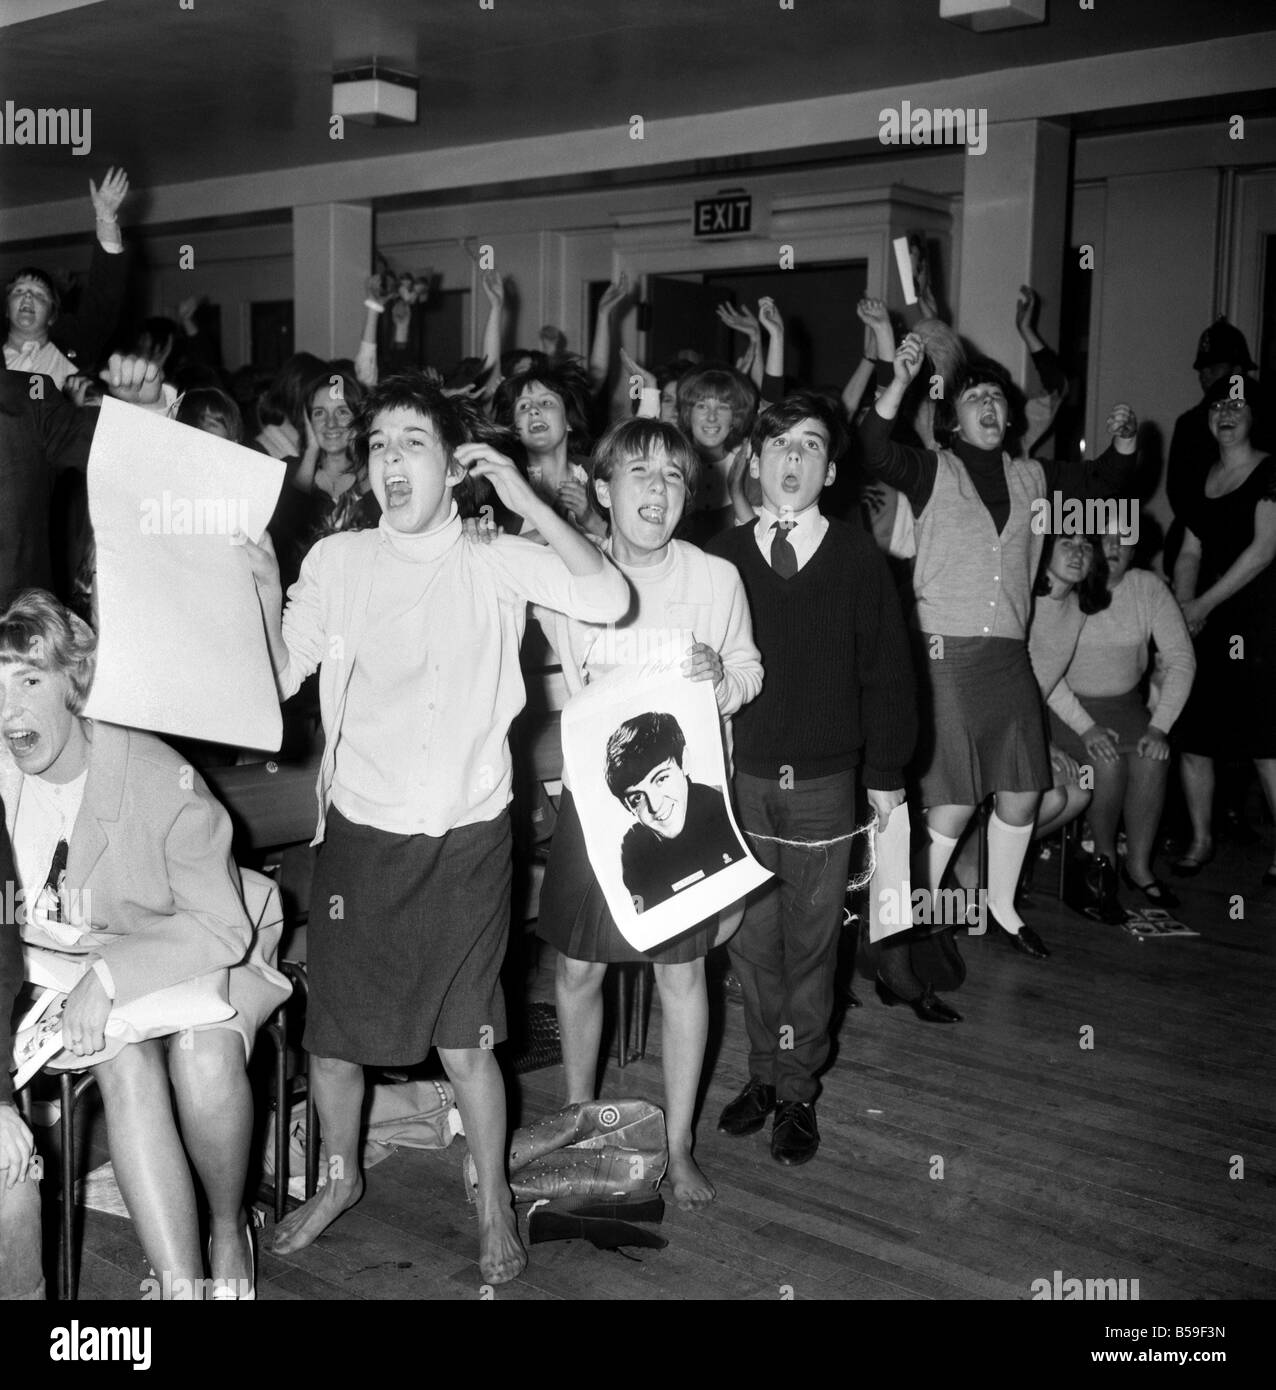 Screaming girl fans greet the Beatles last night on their appearance in ...